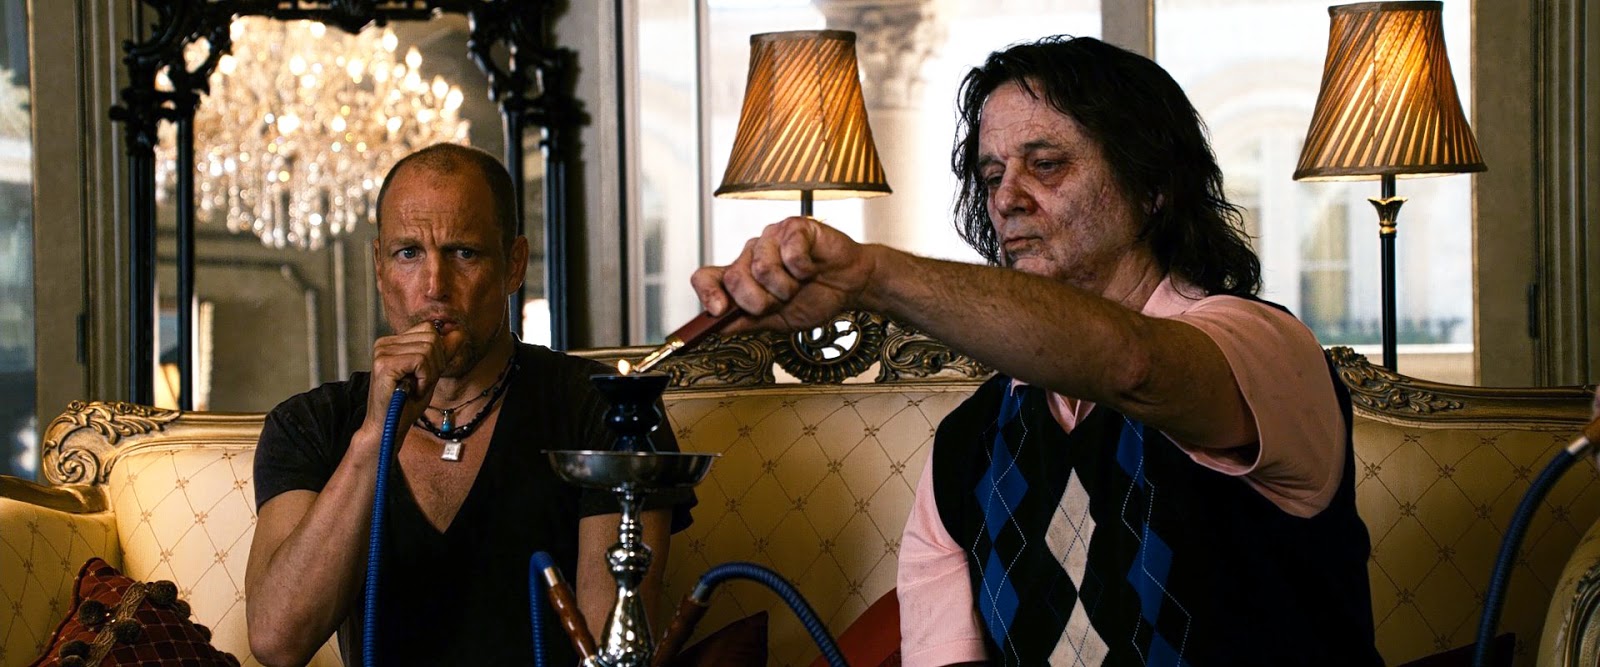 This is an image from the film, Zombieland.